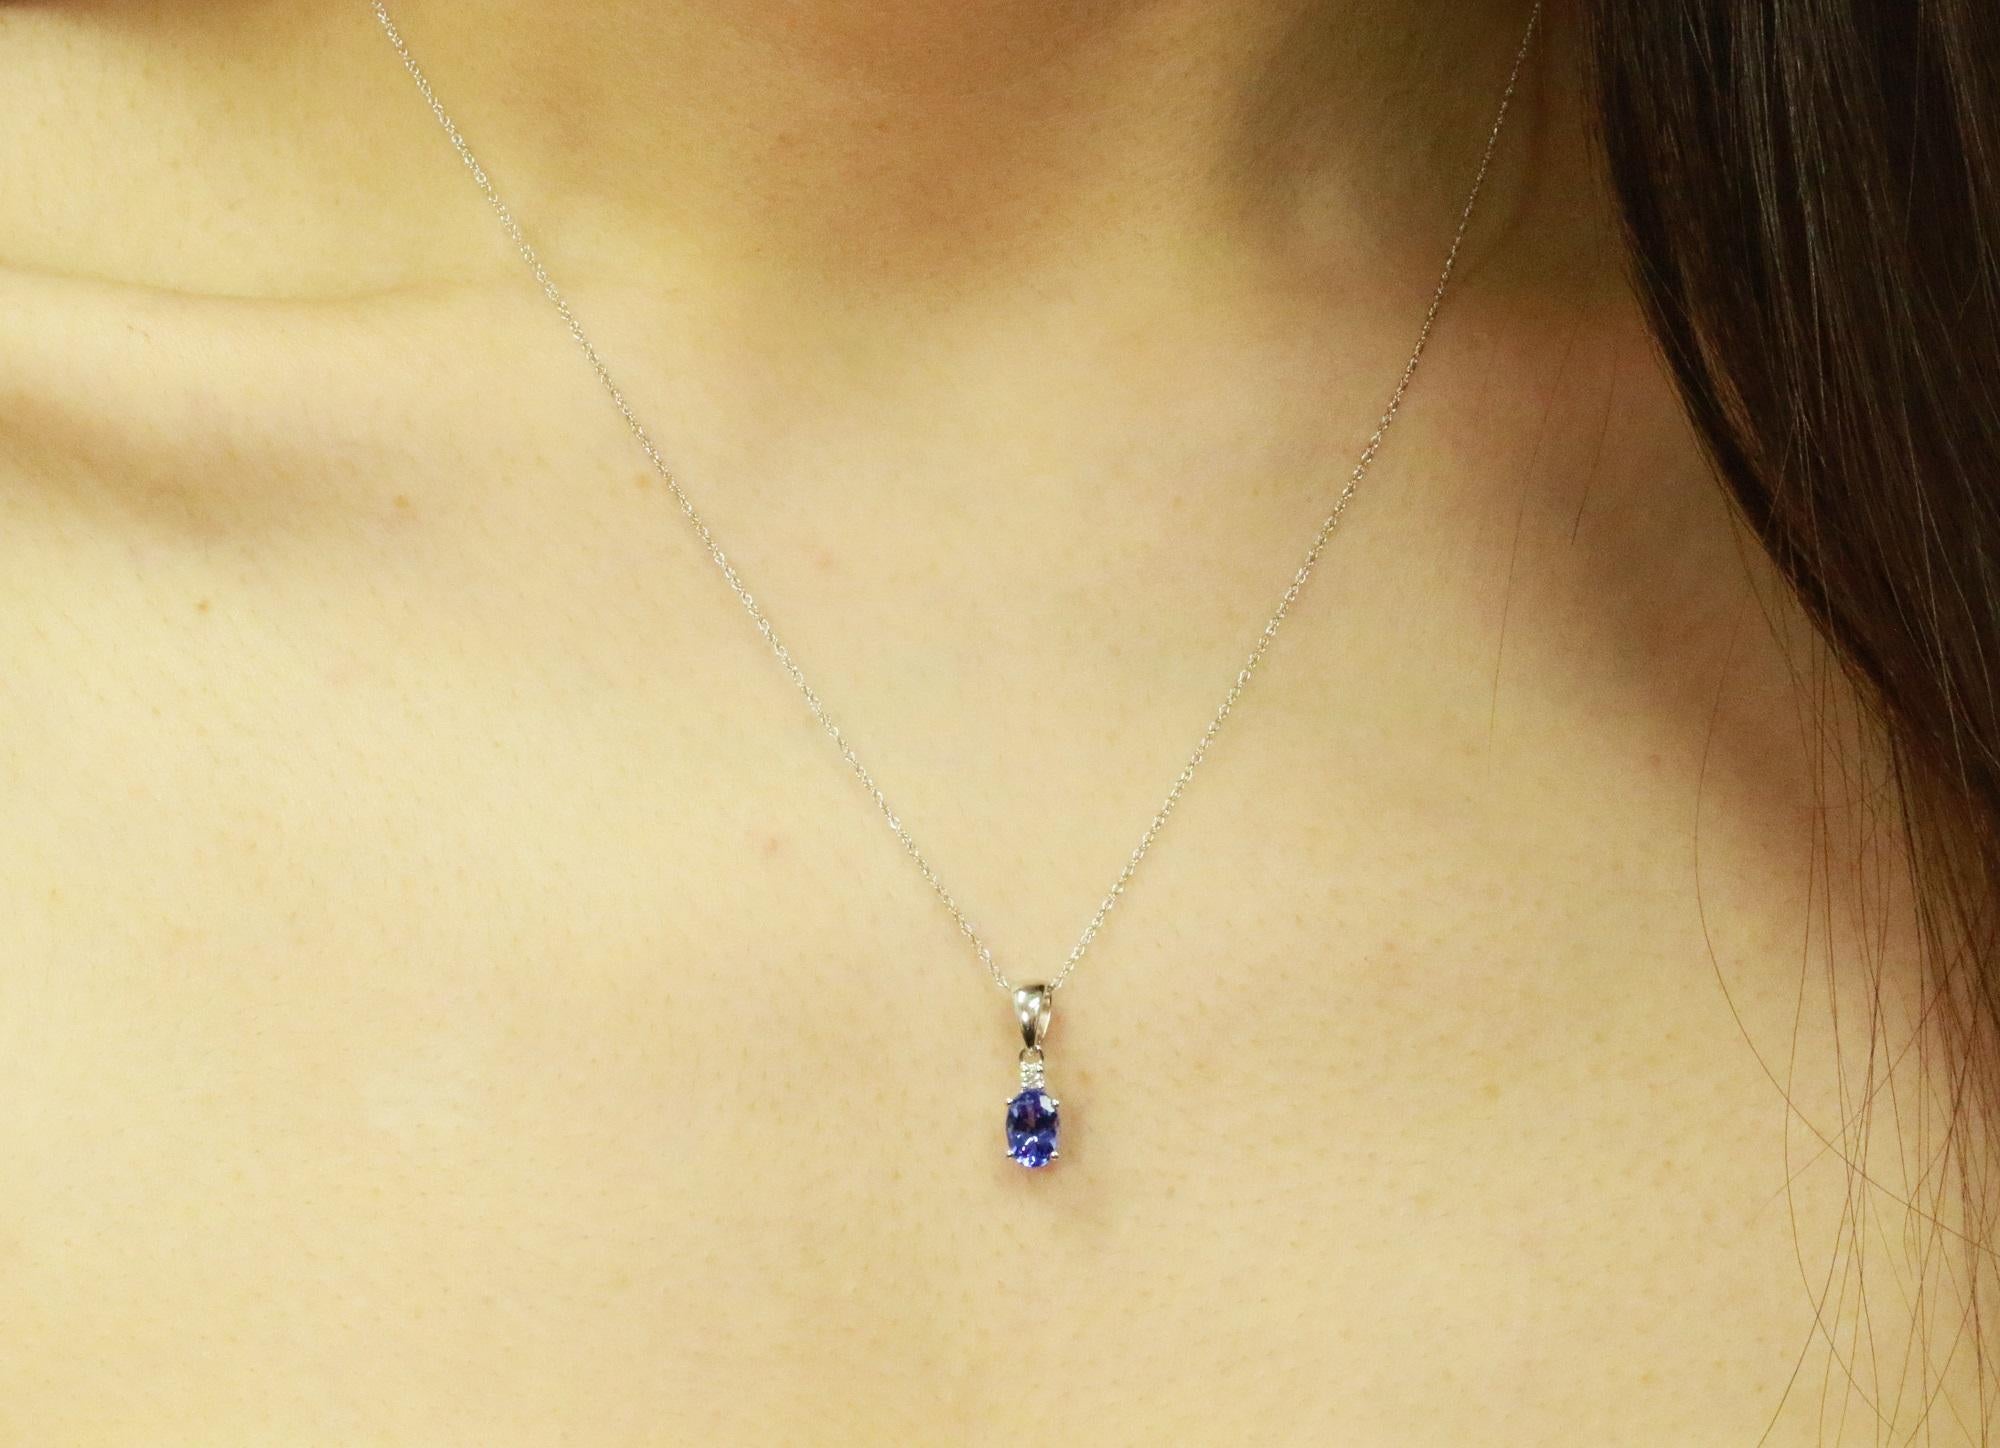 Stunning, timeless and classy eternity Unique Pendant. Decorate yourself in luxury with this Gin & Grace Pendant. The 14k White Gold jewelry boasts Oval-Cut Prong Setting Genuine Tanzanite (1 pcs) 0.65 Carat, along with Natural Round cut white